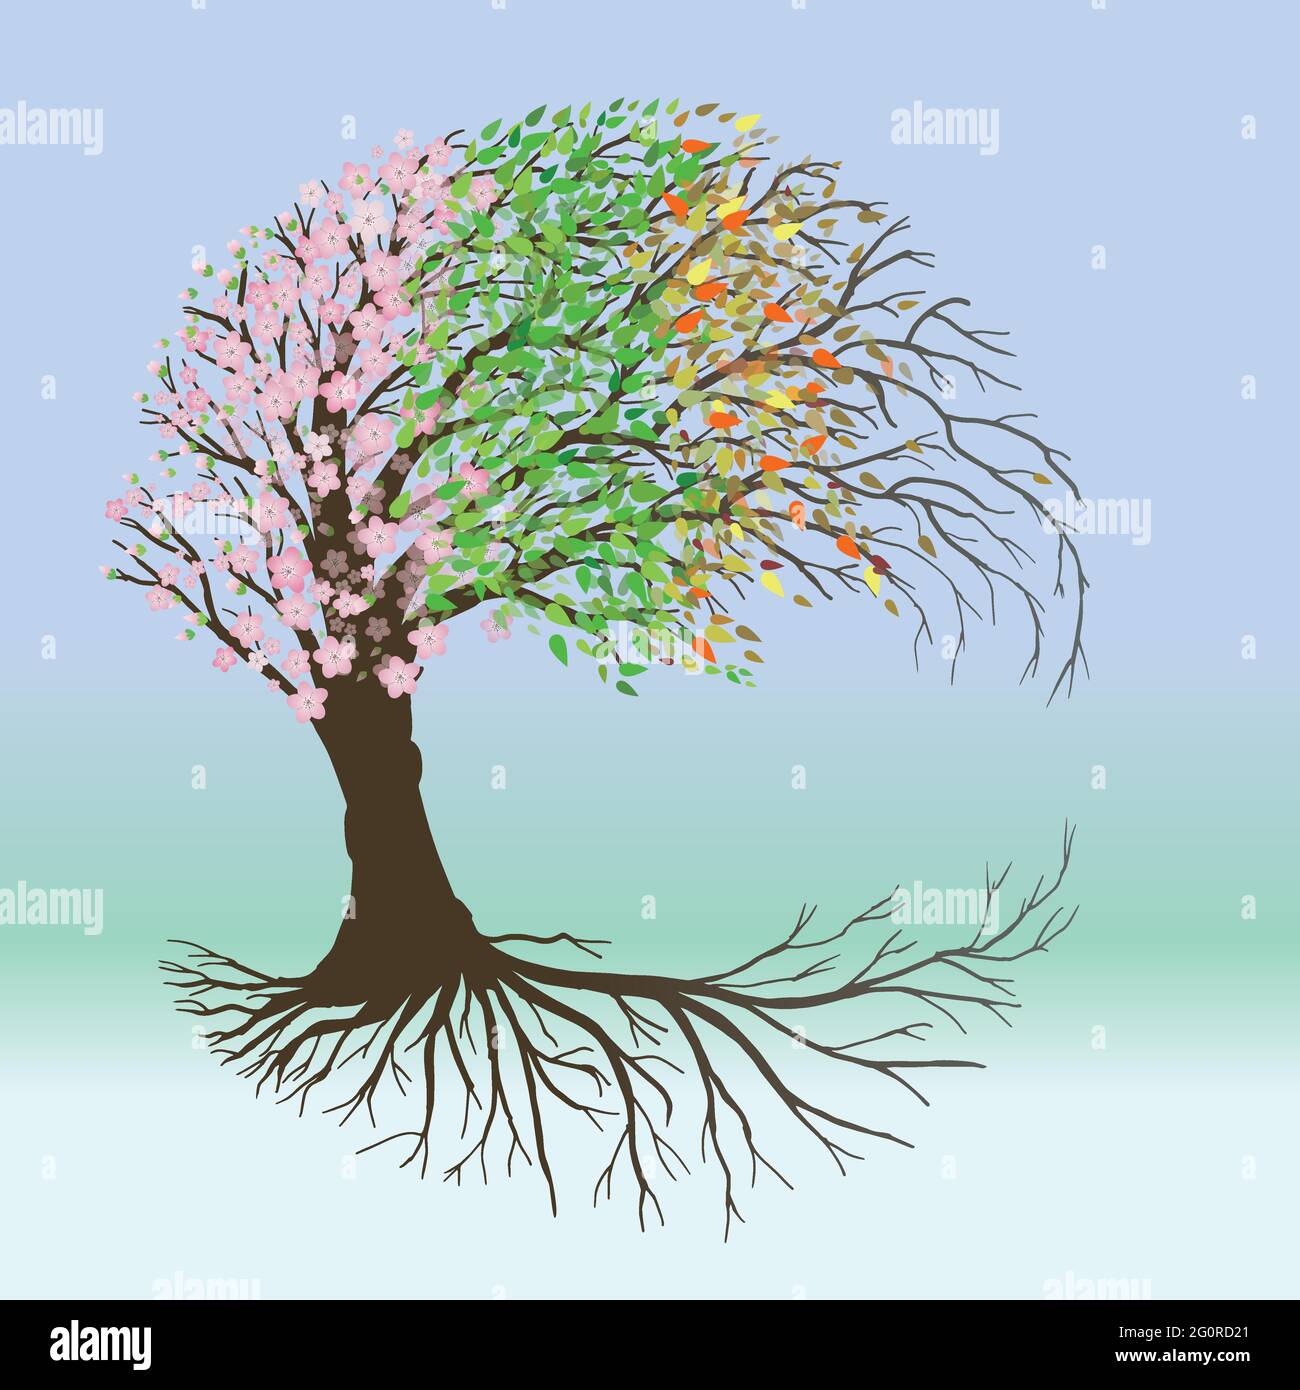 A tree of life with pink blossom and flower butts, green leafs, autumn leafs and winter branches Stock Vector